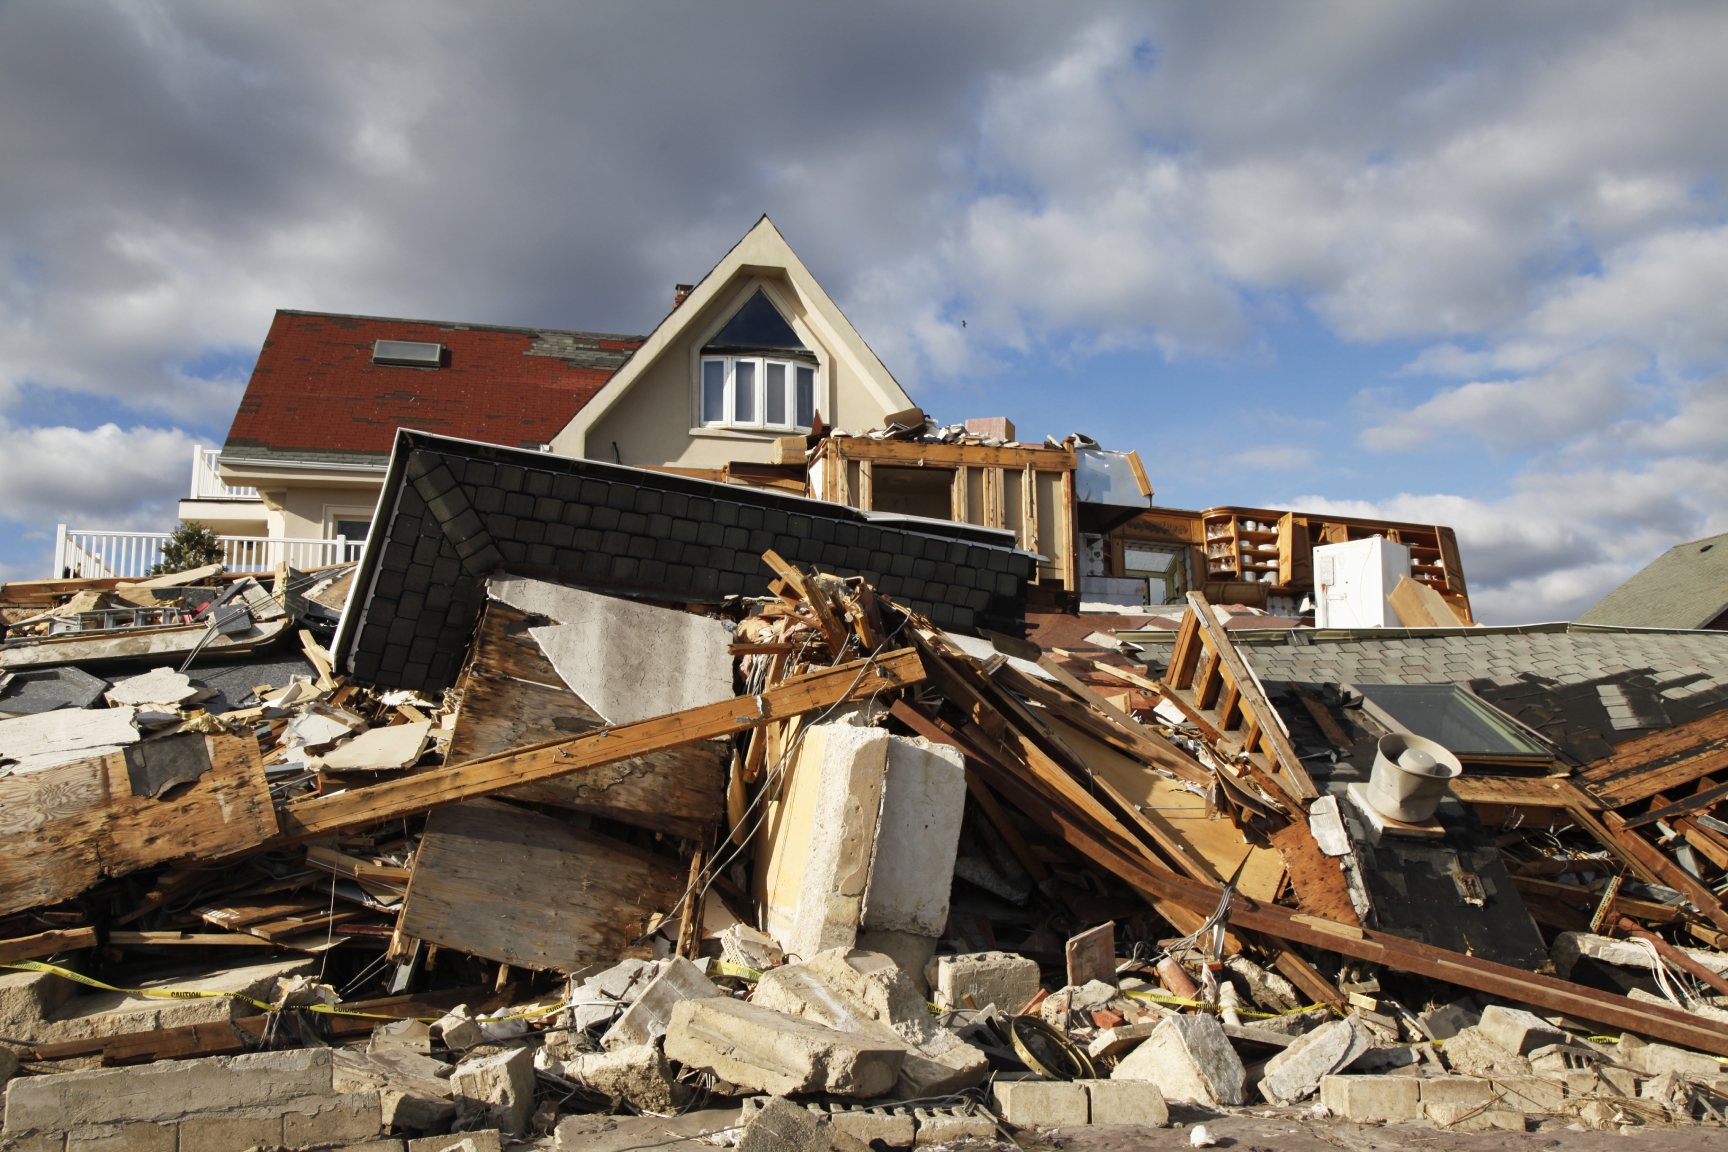 A picture of a house that has been destroyed by a major weather incident